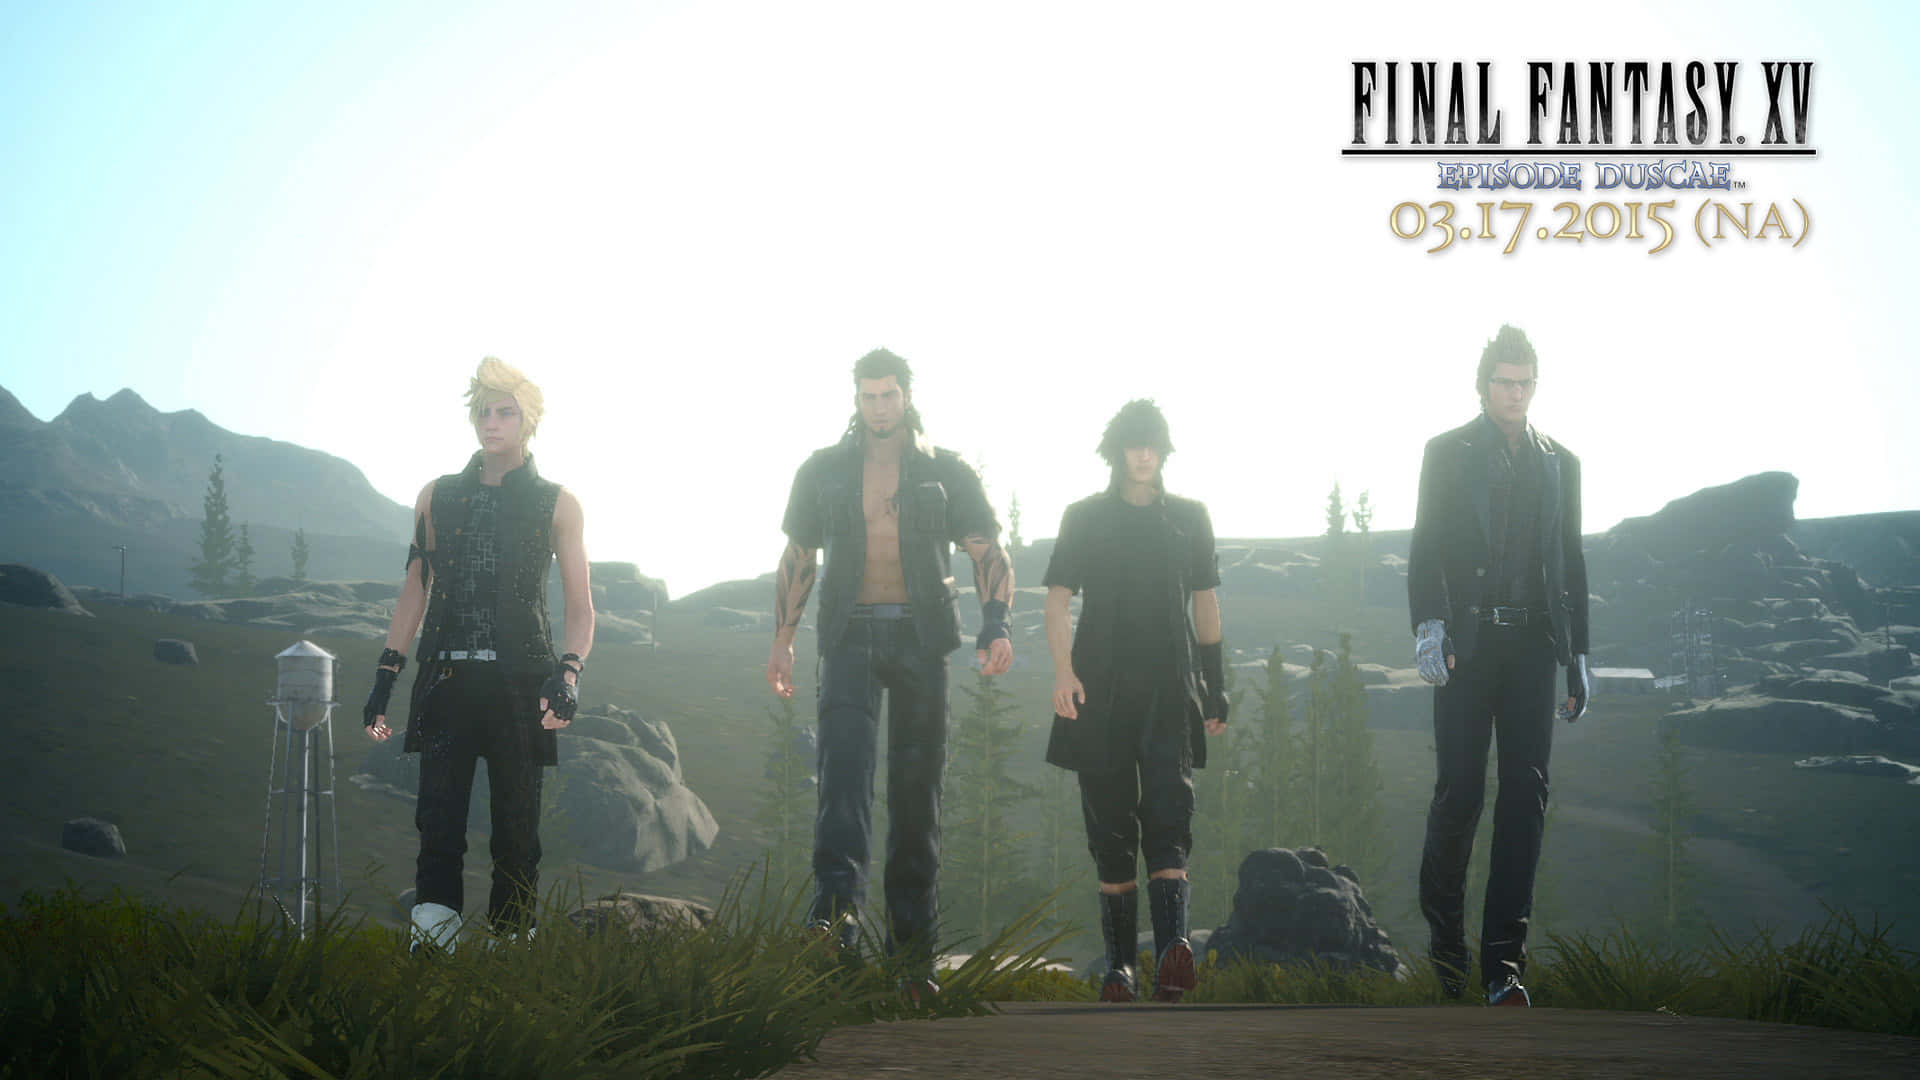 A Still image of the Final Fantasy XV Video Game